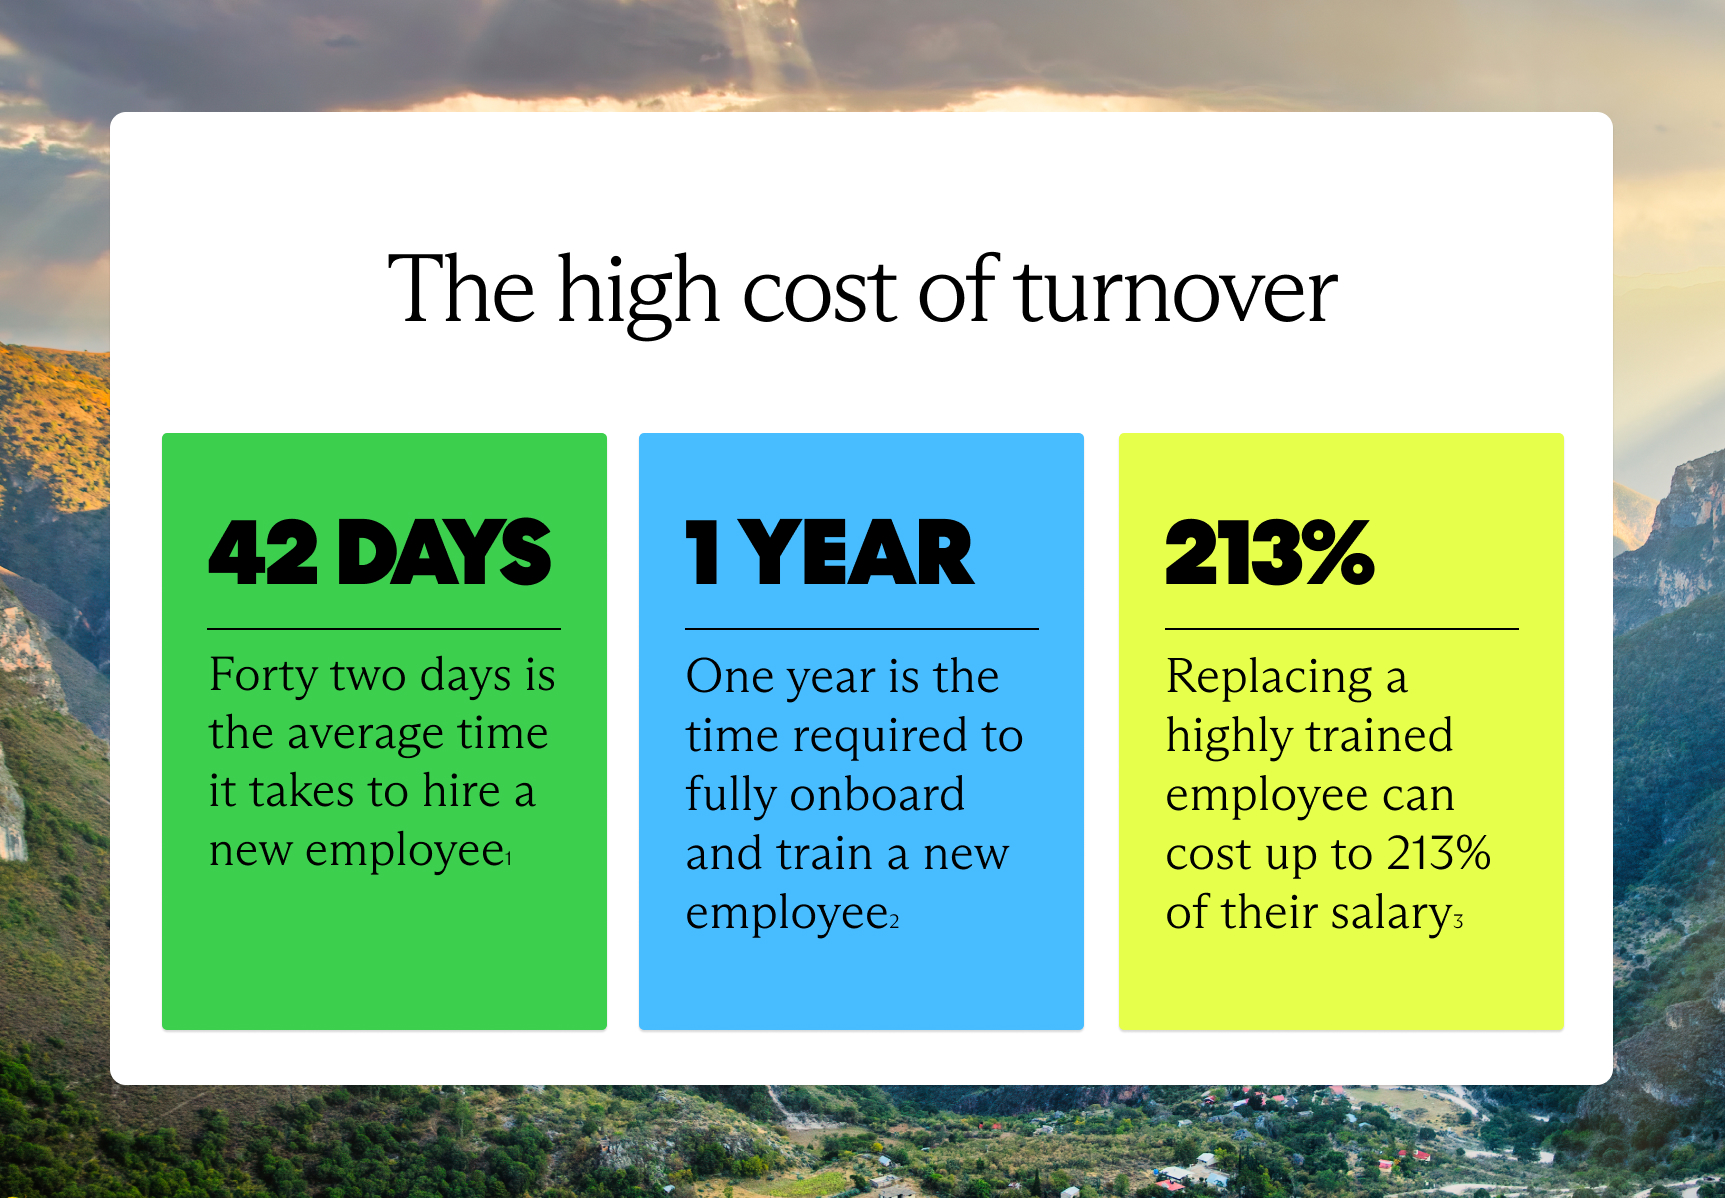 Costs of turnover for an employer: 42 days to hire a new employee, 1 year to fully onboard and train a new employee, 213% increase in salary costs to replace a highly trained employee